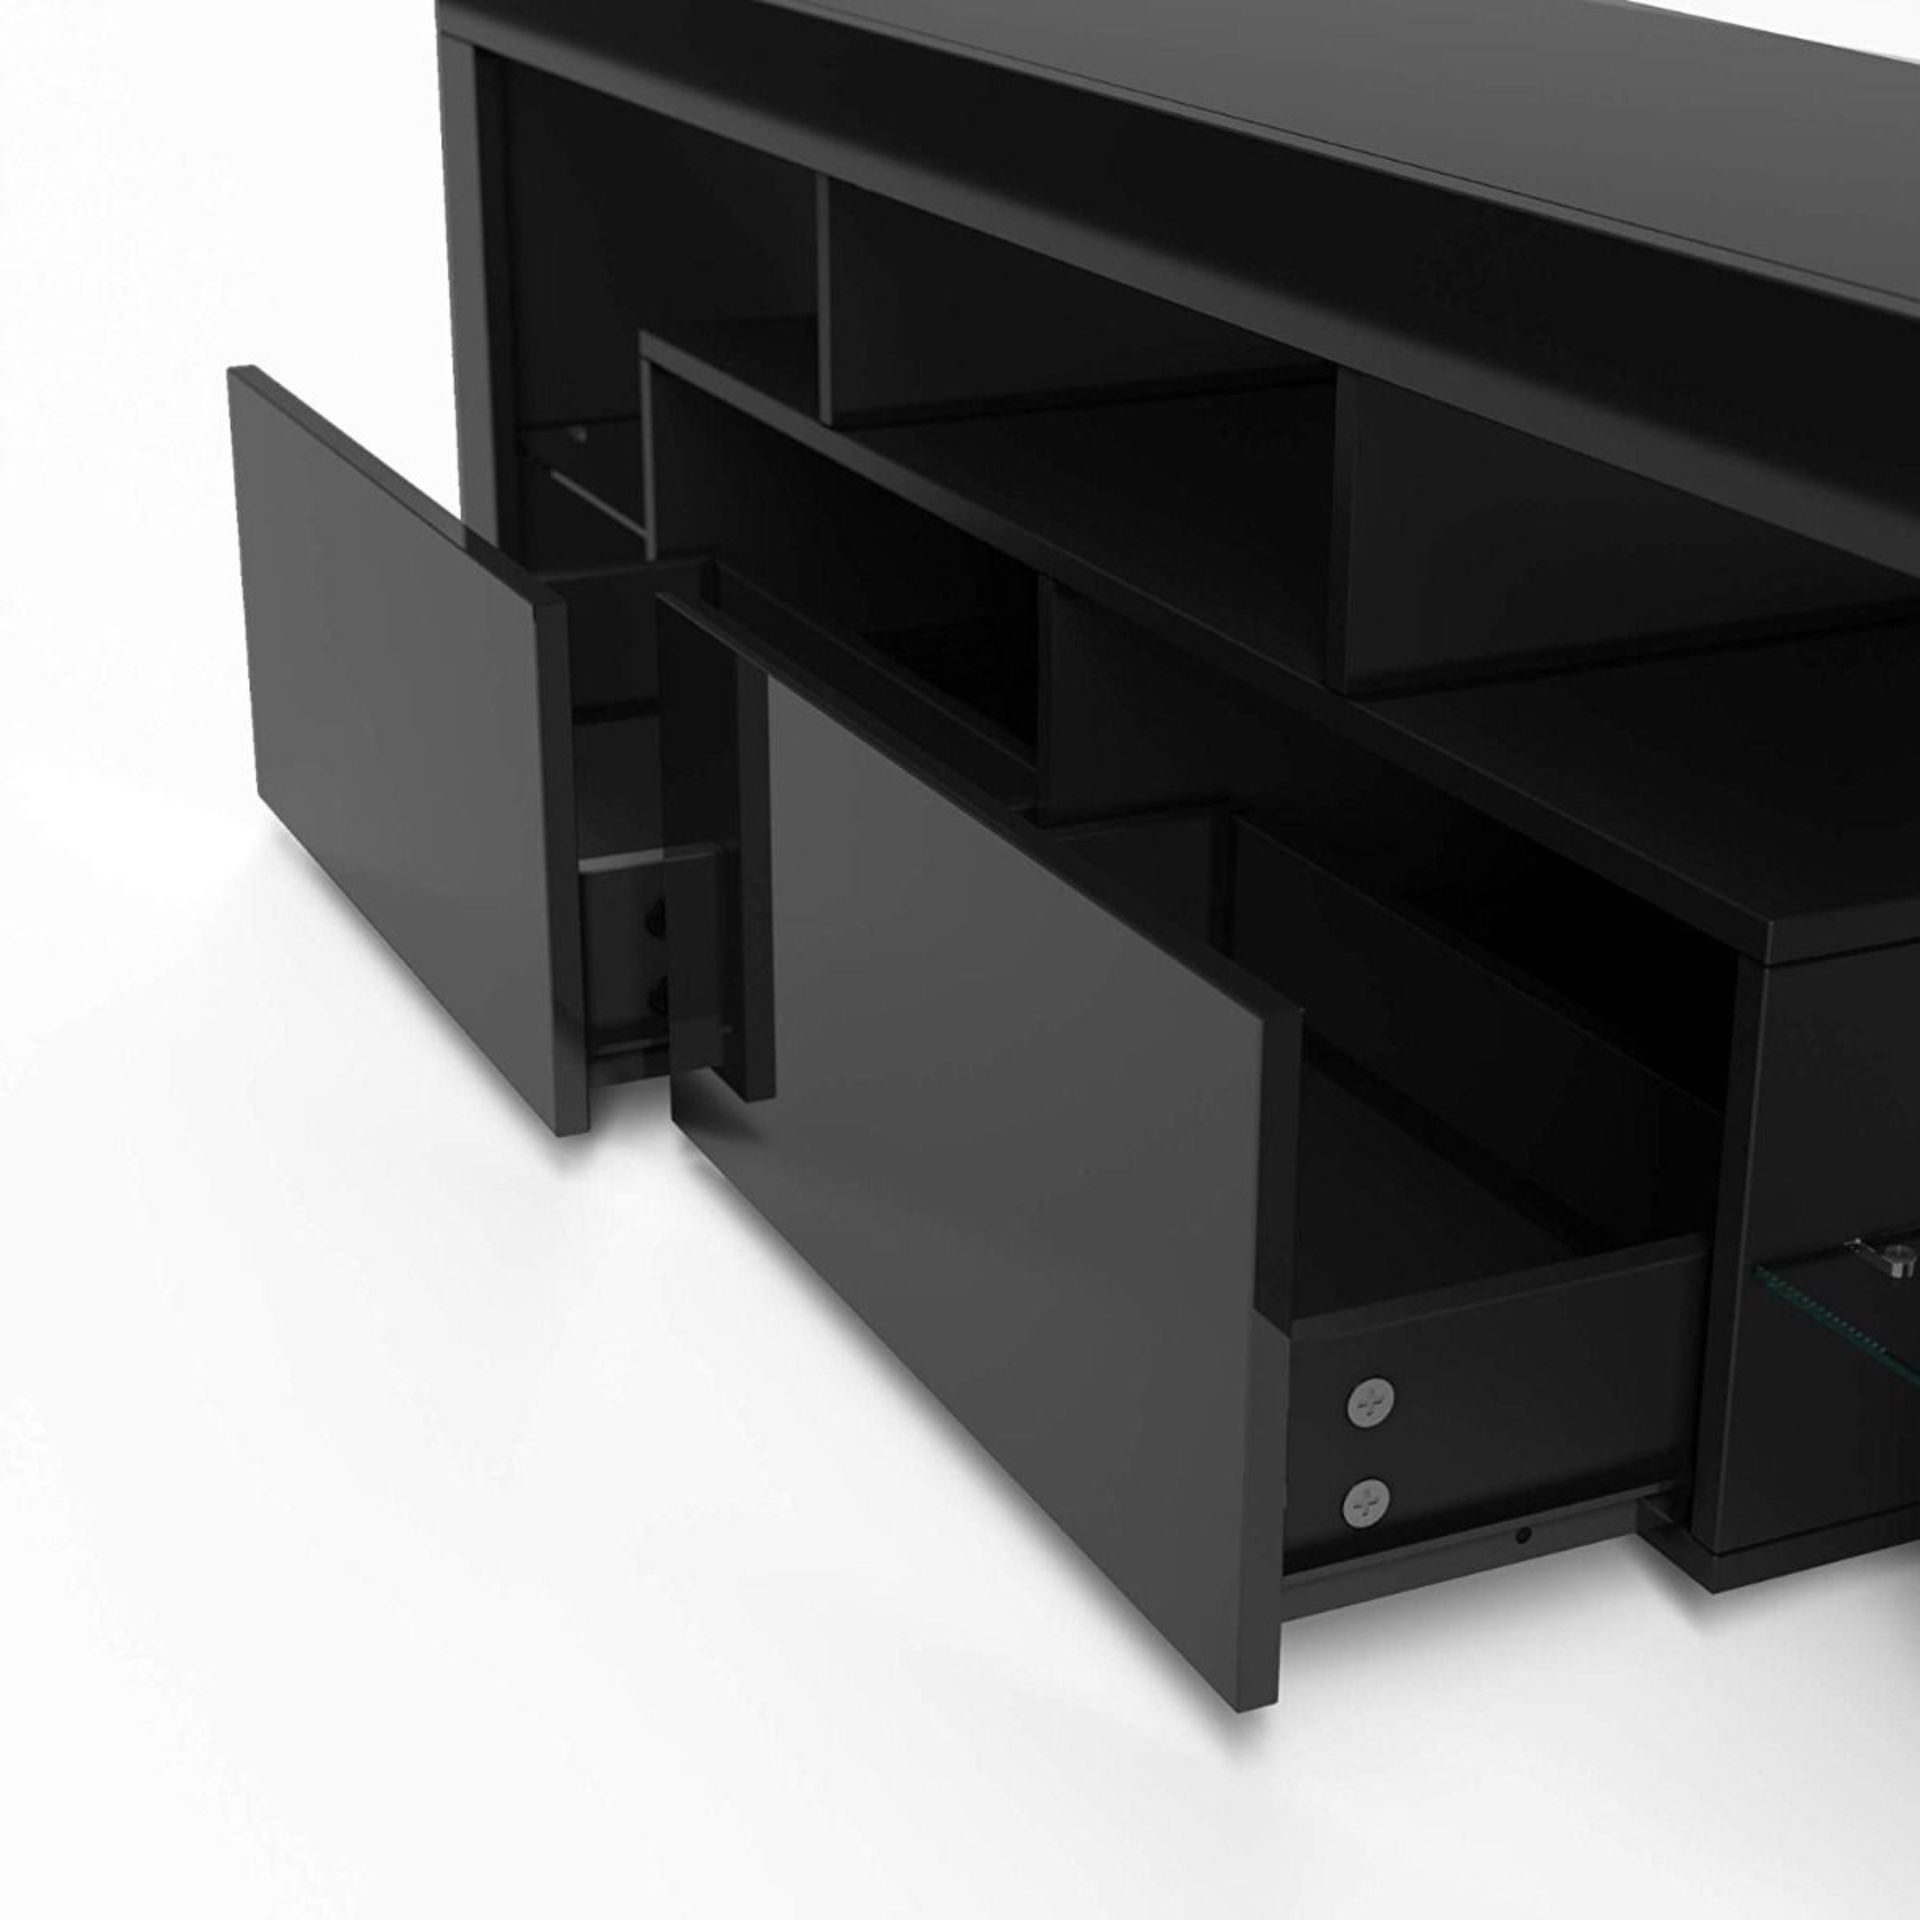 BLACK MODERN 160CM TV UNIT CABINET TV STAND HIGH GLOSS DOORS WITH FREE LEDS - Image 3 of 3